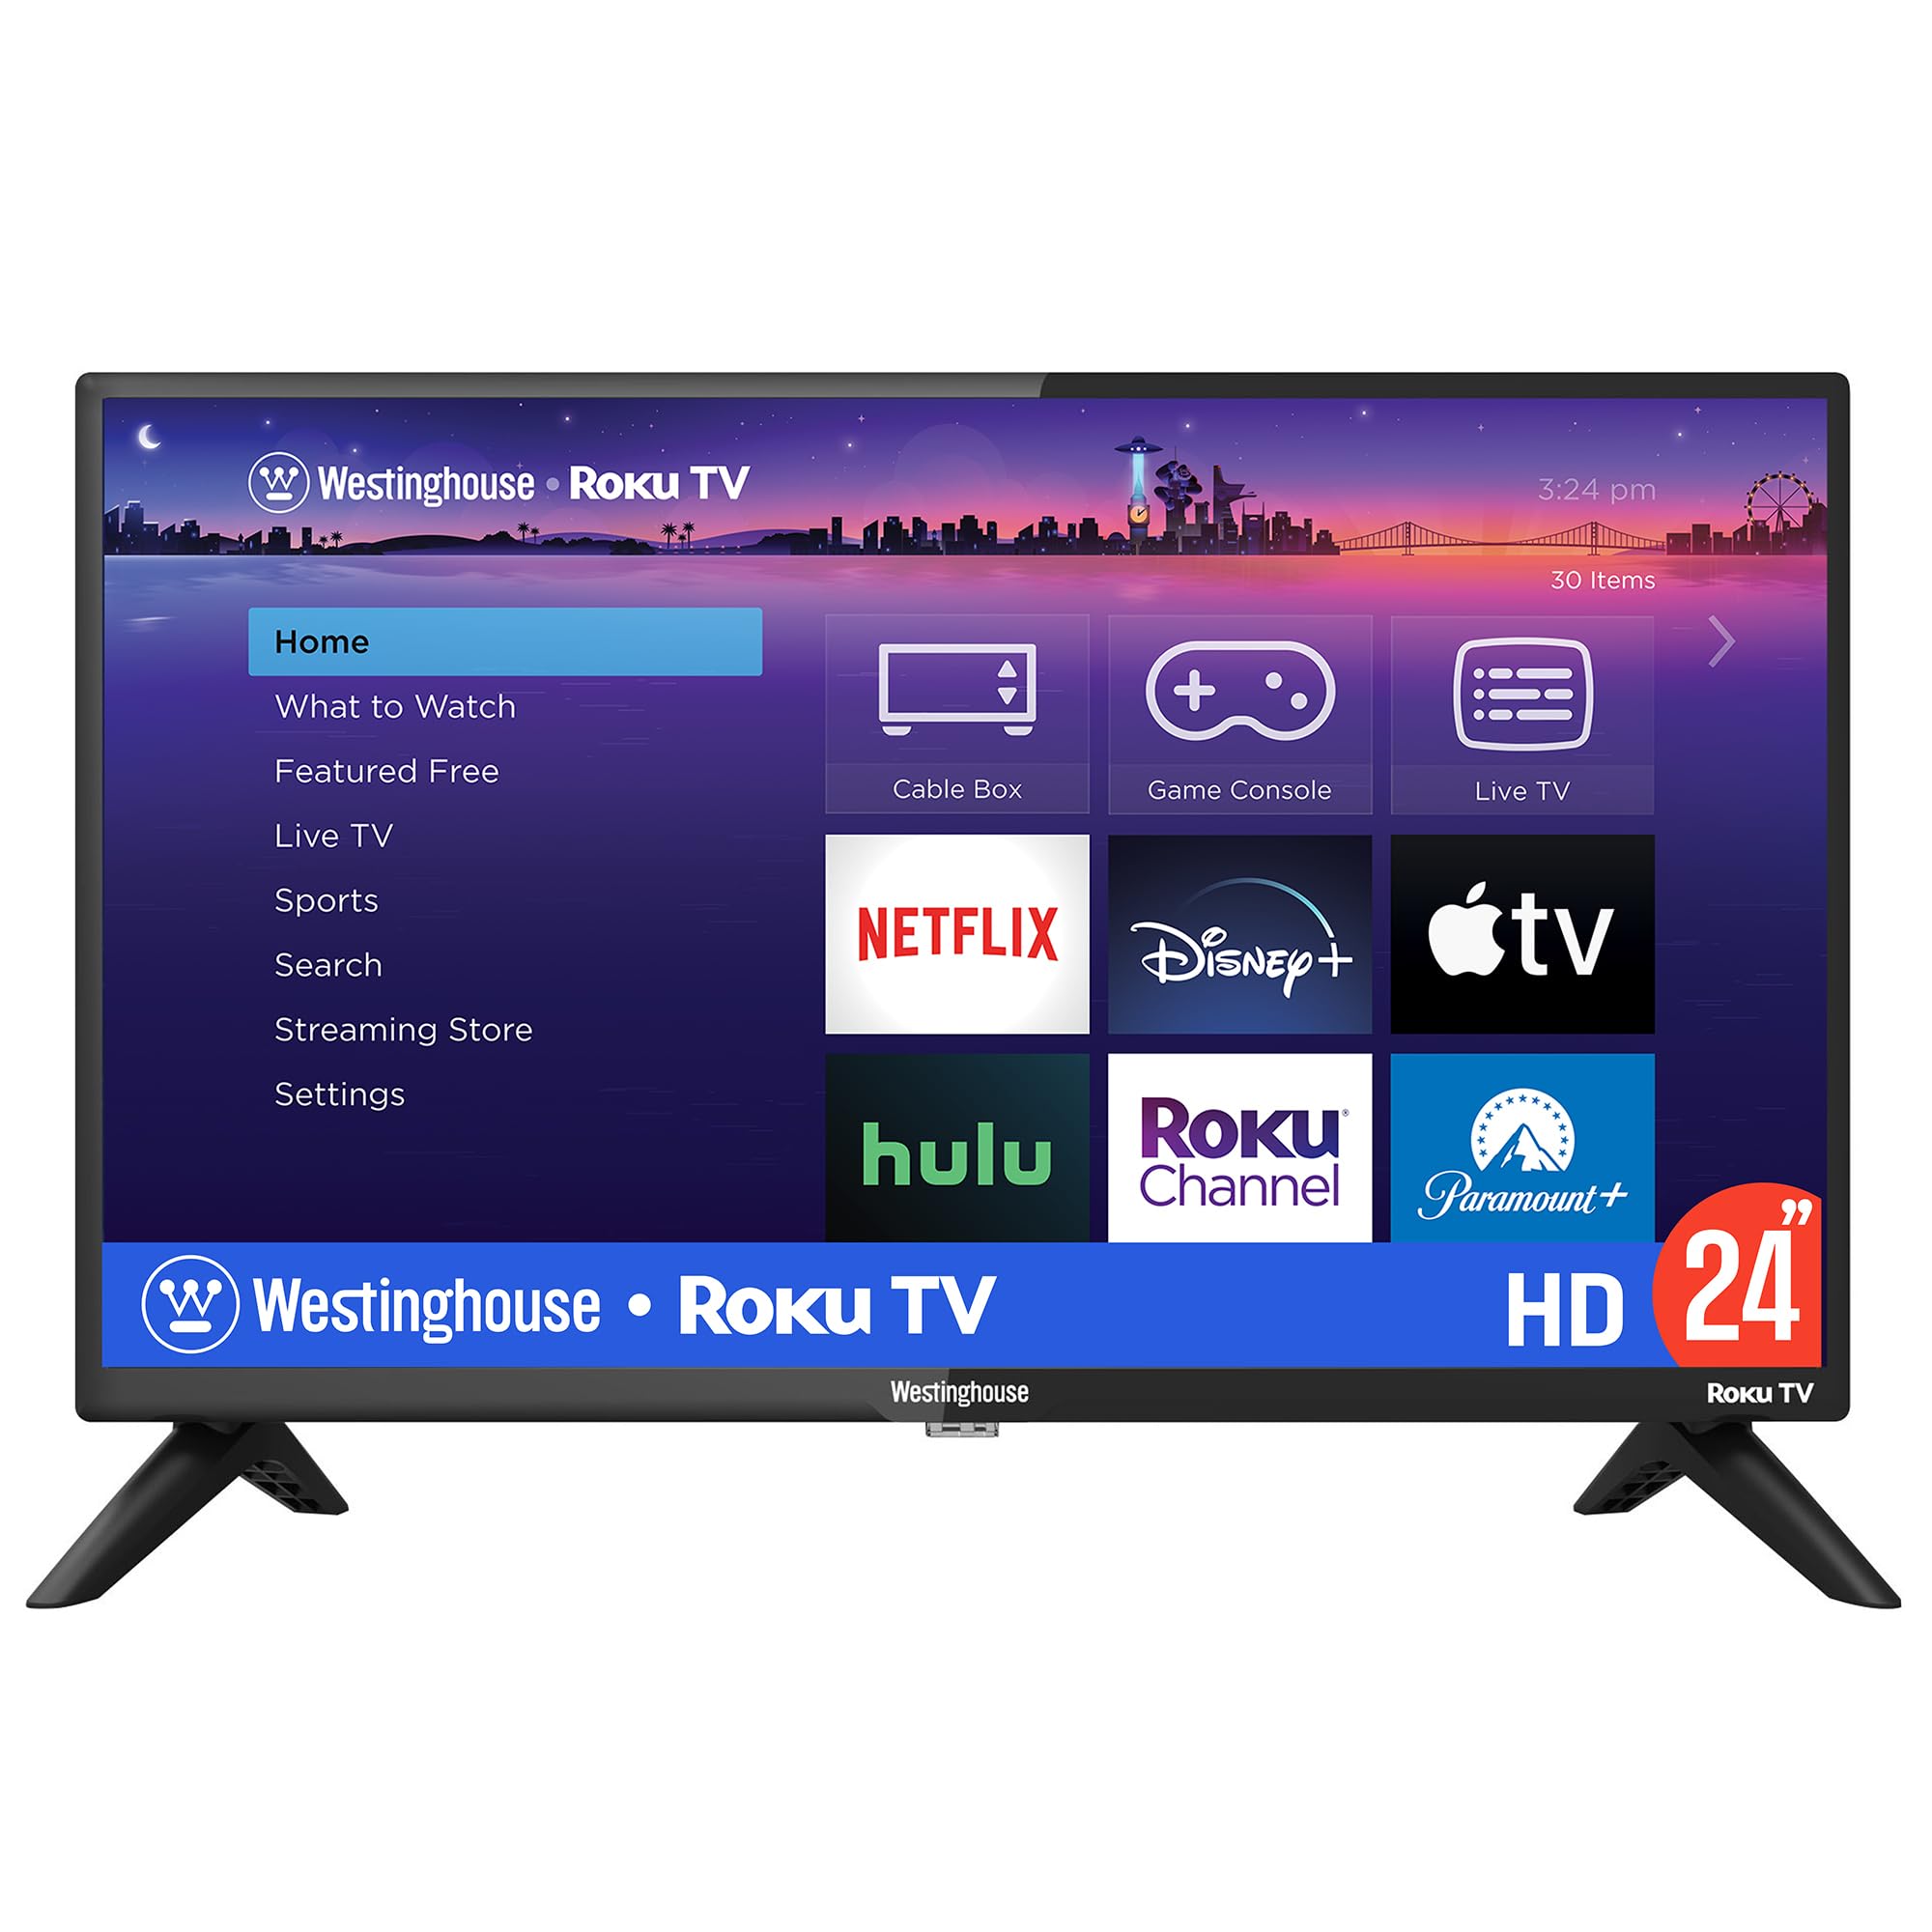 Westinghouse Roku TV – 24 Inch Smart TV, 720P LED HD TV with Wi-Fi Connectivity and Mobile App, Flat Screen TV Compatible with Apple Home Kit, Alexa and Google Assistant